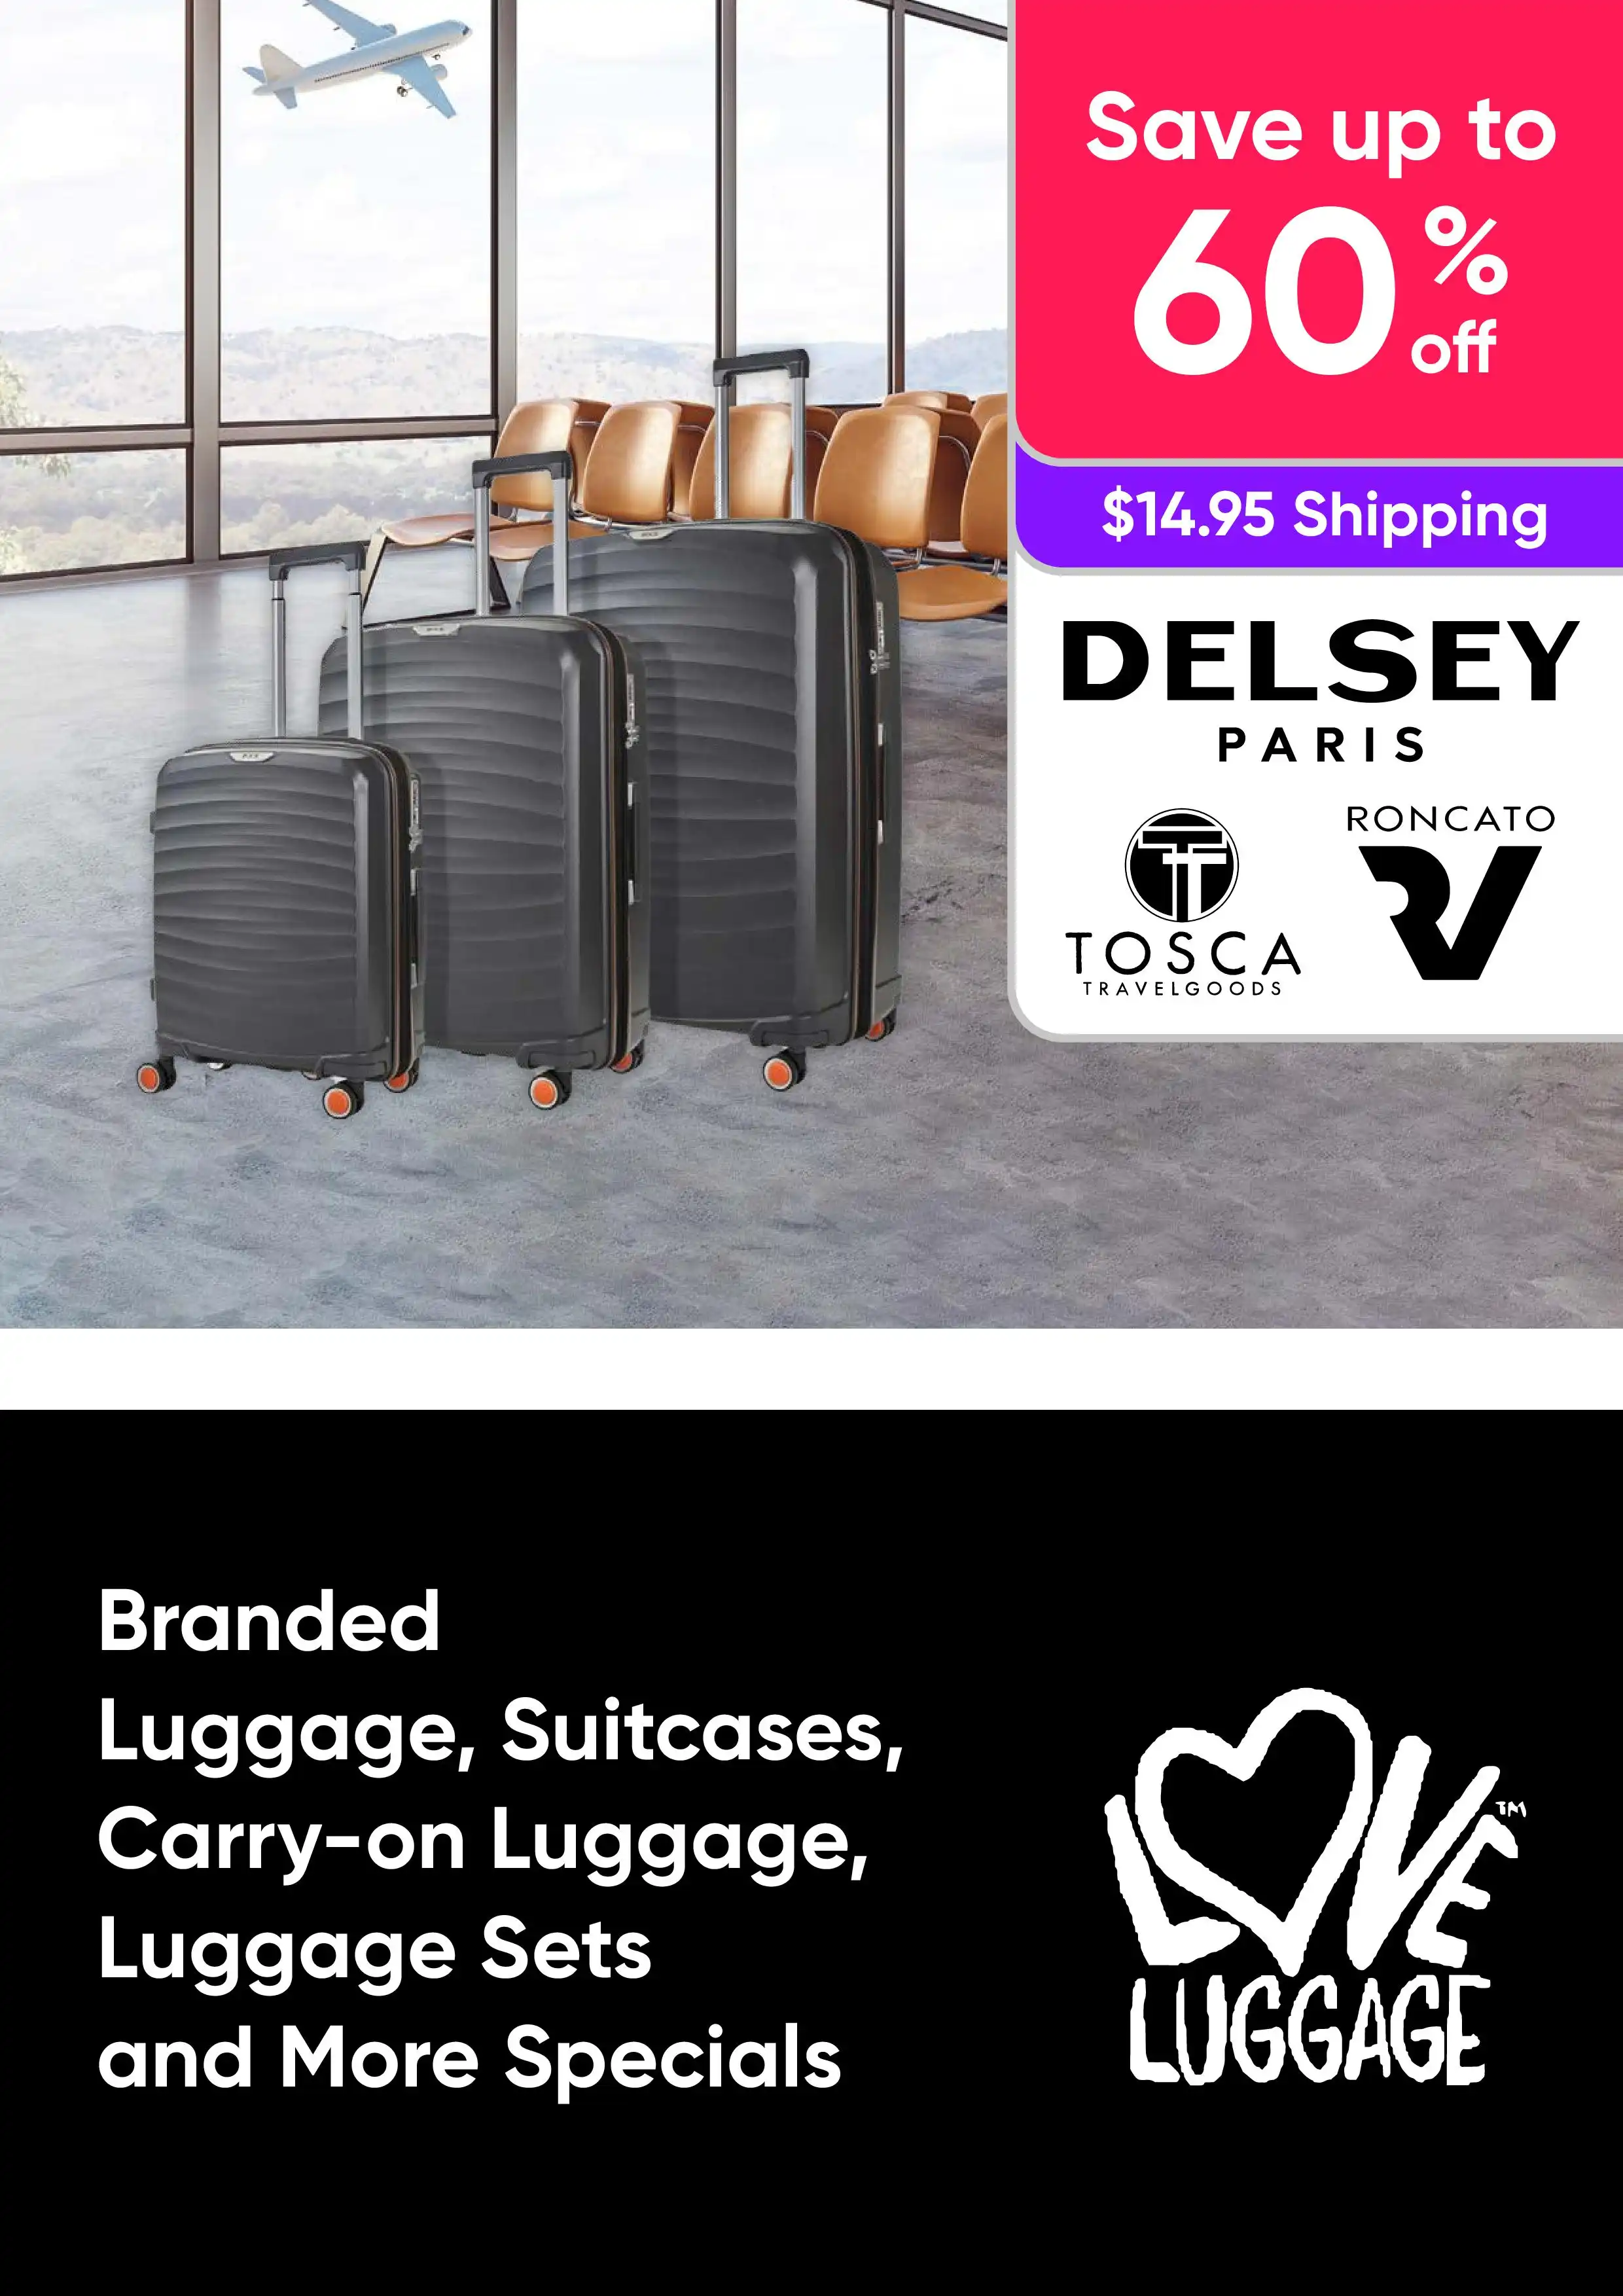 Save up to 60% off Branded Luggage, Suitcases, Carry on Luggage, Luggage Sets and More